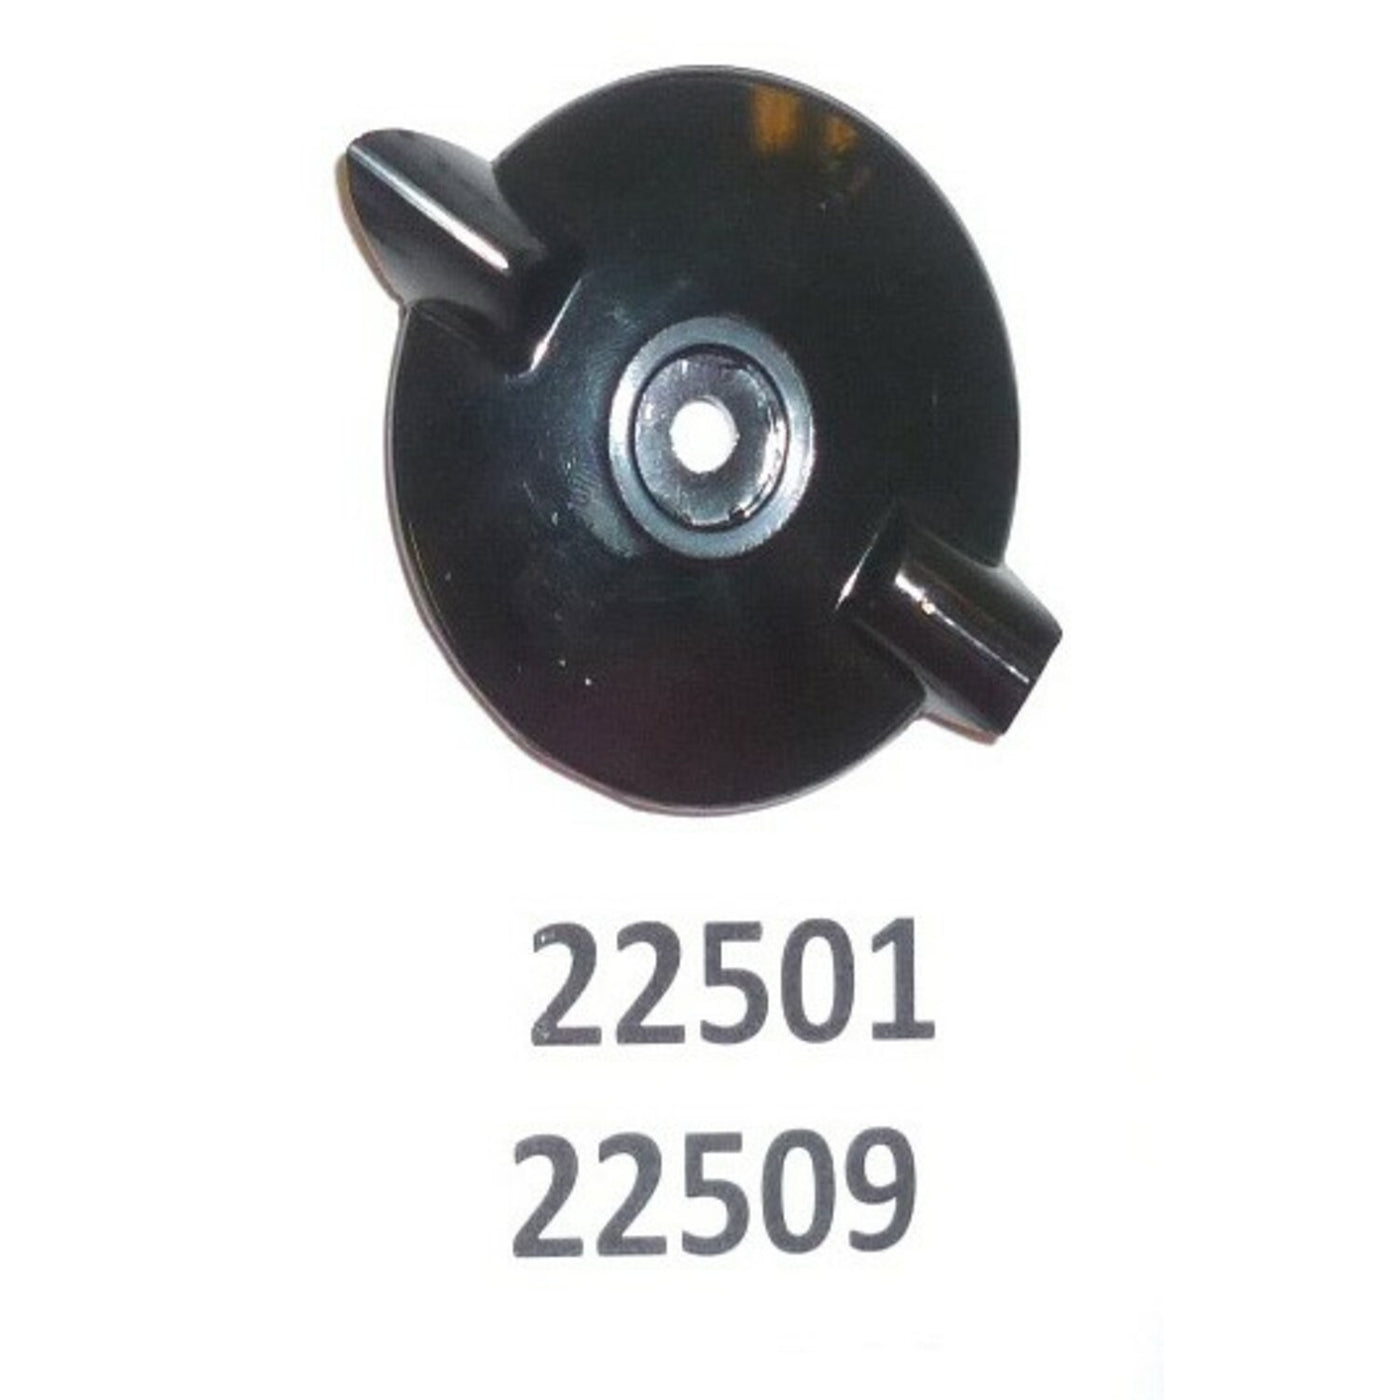 Black Whistle Assembly Only (22509)